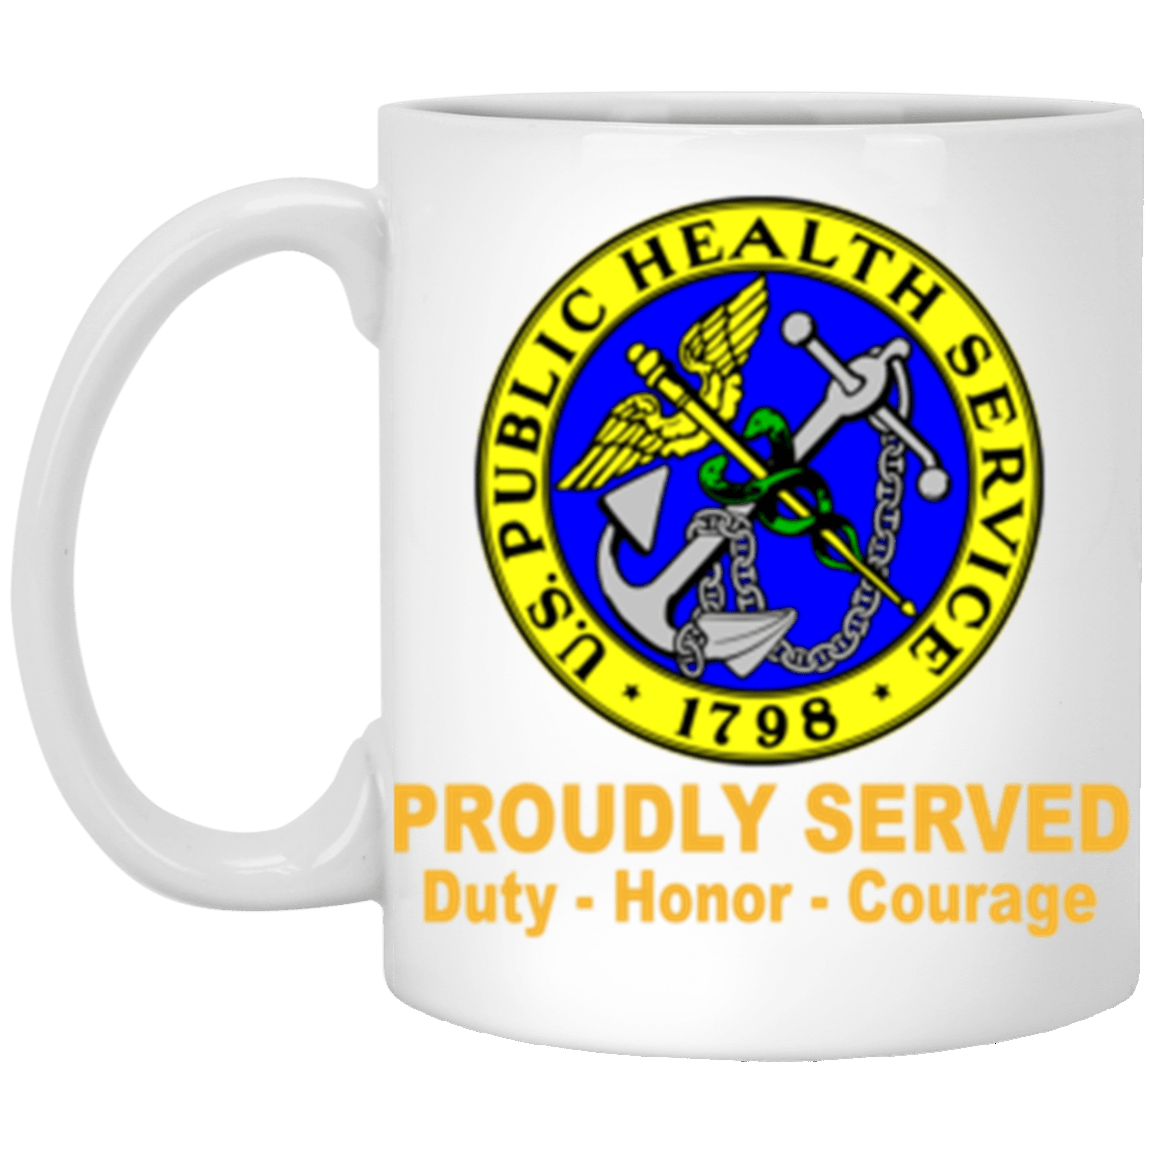 US Army Public Health Service Proudly Served Core Values 11 oz. White Mug-Drinkware-Veterans Nation